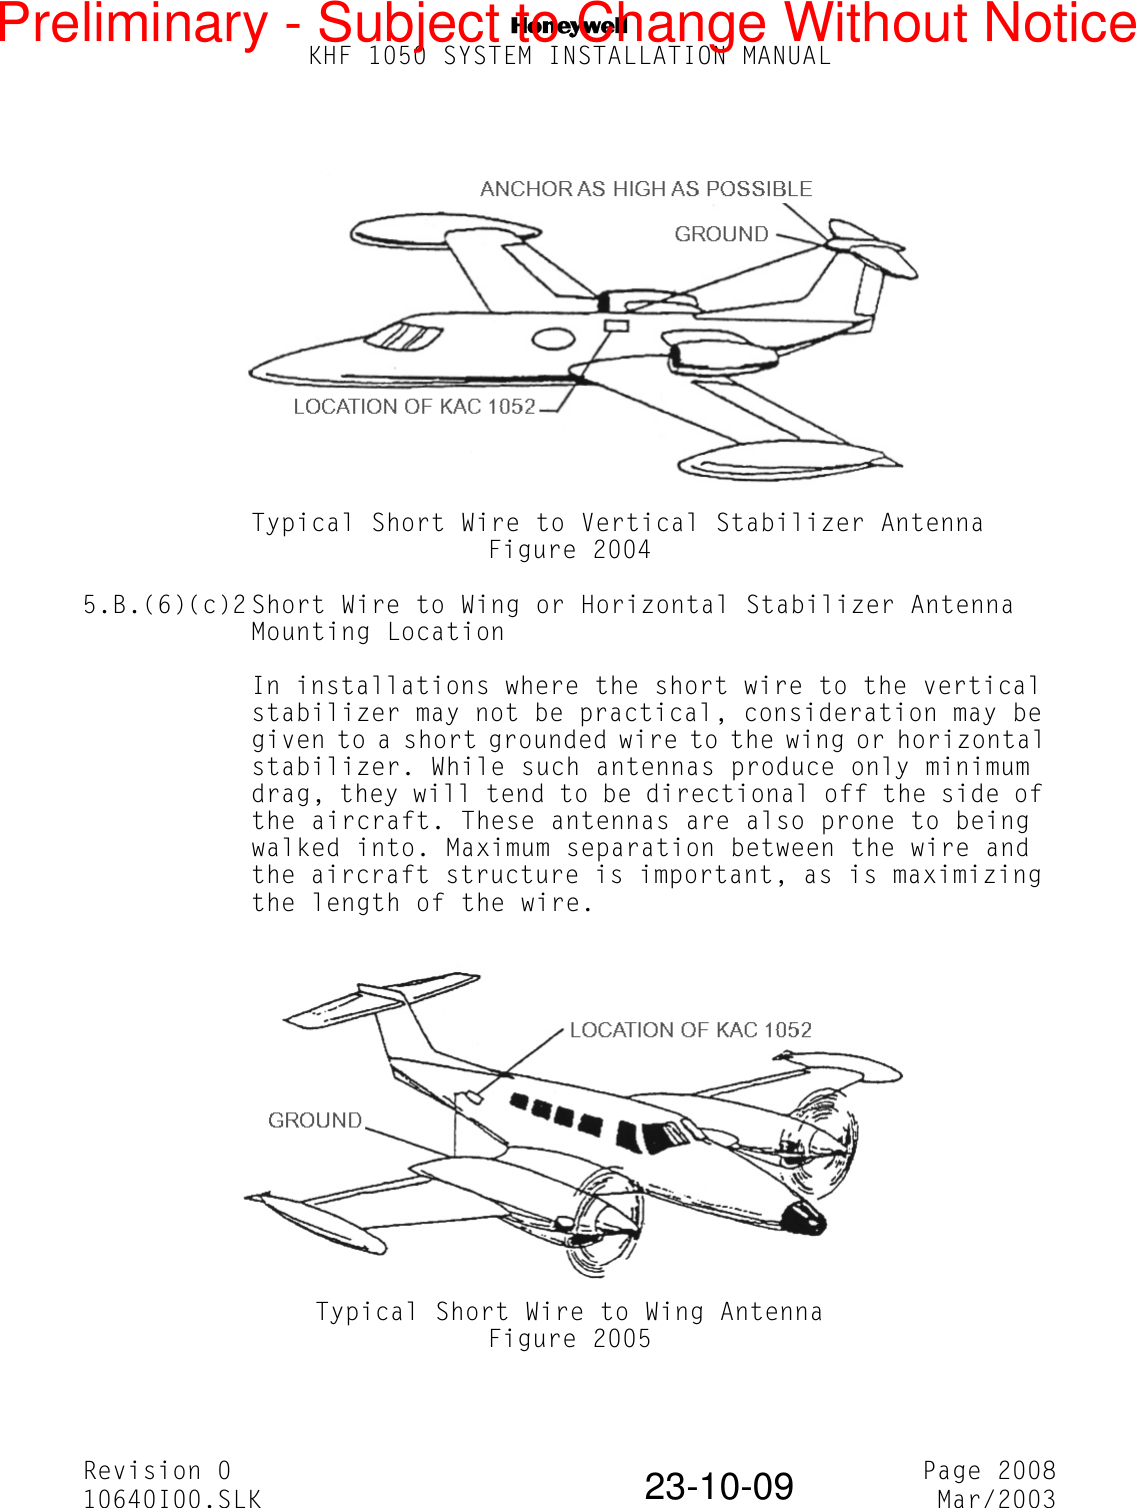 NKHF 1050 SYSTEM INSTALLATION MANUALRevision 0 Page 200810640I00.SLK Mar/200323-10-09Typical Short Wire to Vertical Stabilizer AntennaFigure 20045.B.(6)(c)2 Short Wire to Wing or Horizontal Stabilizer Antenna Mounting LocationIn installations where the short wire to the vertical stabilizer may not be practical, consideration may be given to a short grounded wire to the wing or horizontal stabilizer. While such antennas produce only minimum drag, they will tend to be directional off the side of the aircraft. These antennas are also prone to being walked into. Maximum separation between the wire and the aircraft structure is important, as is maximizing the length of the wire.Typical Short Wire to Wing AntennaFigure 2005Preliminary - Subject to Change Without Notice